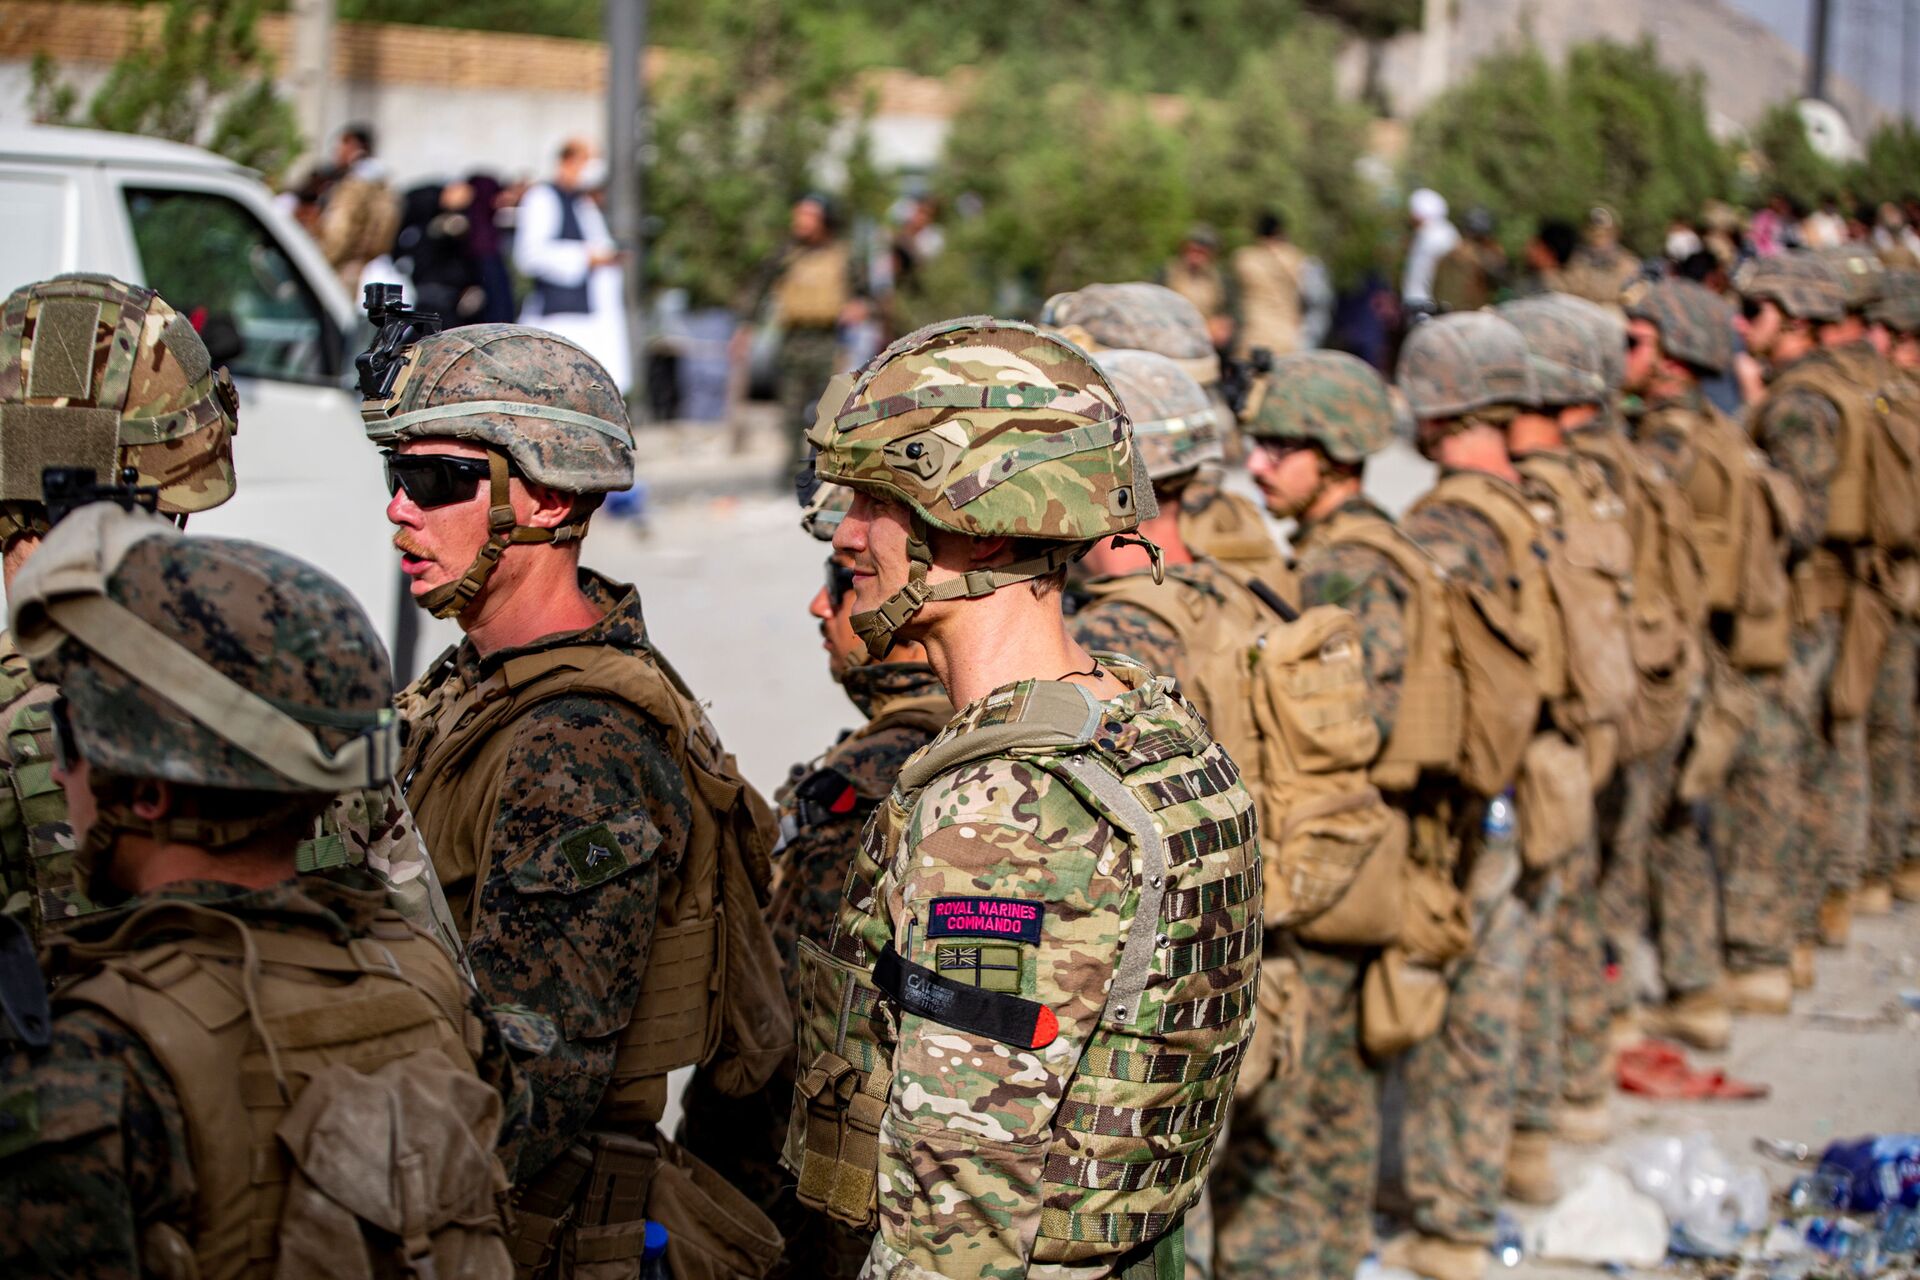 British Royal Marine Commandos and U.S. Marines assigned to the 24th Marine Expeditionary Unit work at an Evacuation Control Center (ECC) during an evacuation at Hamid Karzai International Airport, Kabul, Afghanistan, August 18, 2021 - Sputnik International, 1920, 07.09.2021